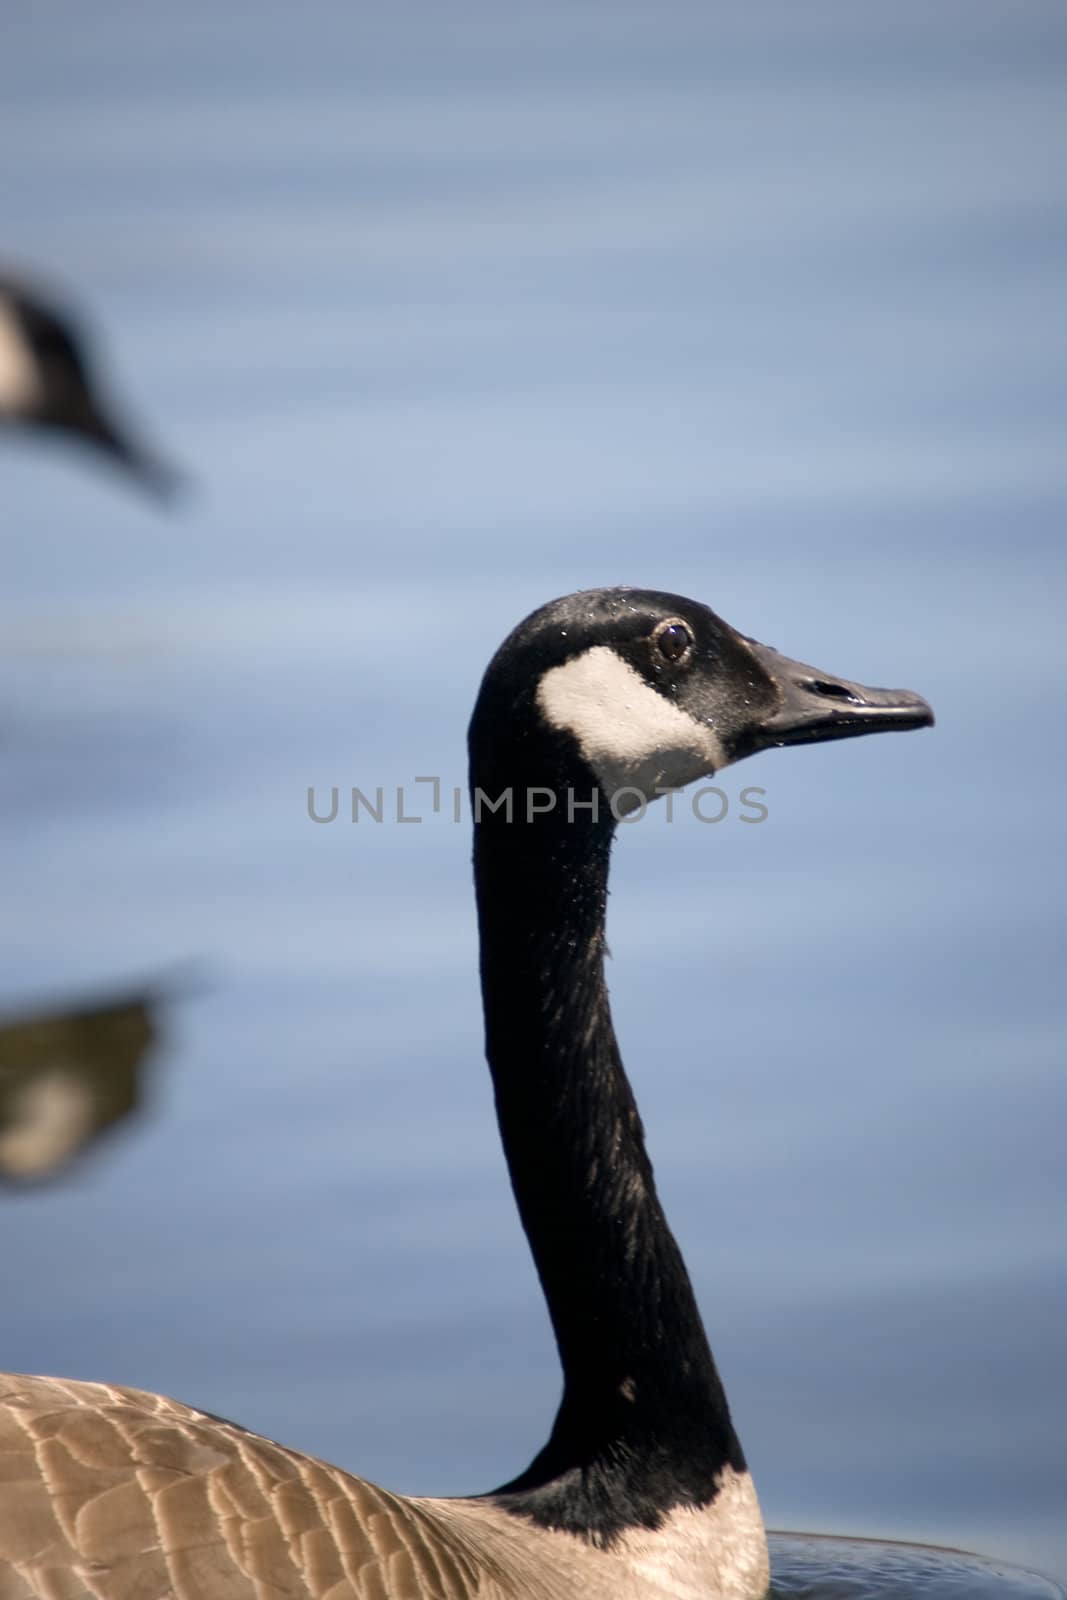 A closeup of a Canada Goose, with a blue water background.